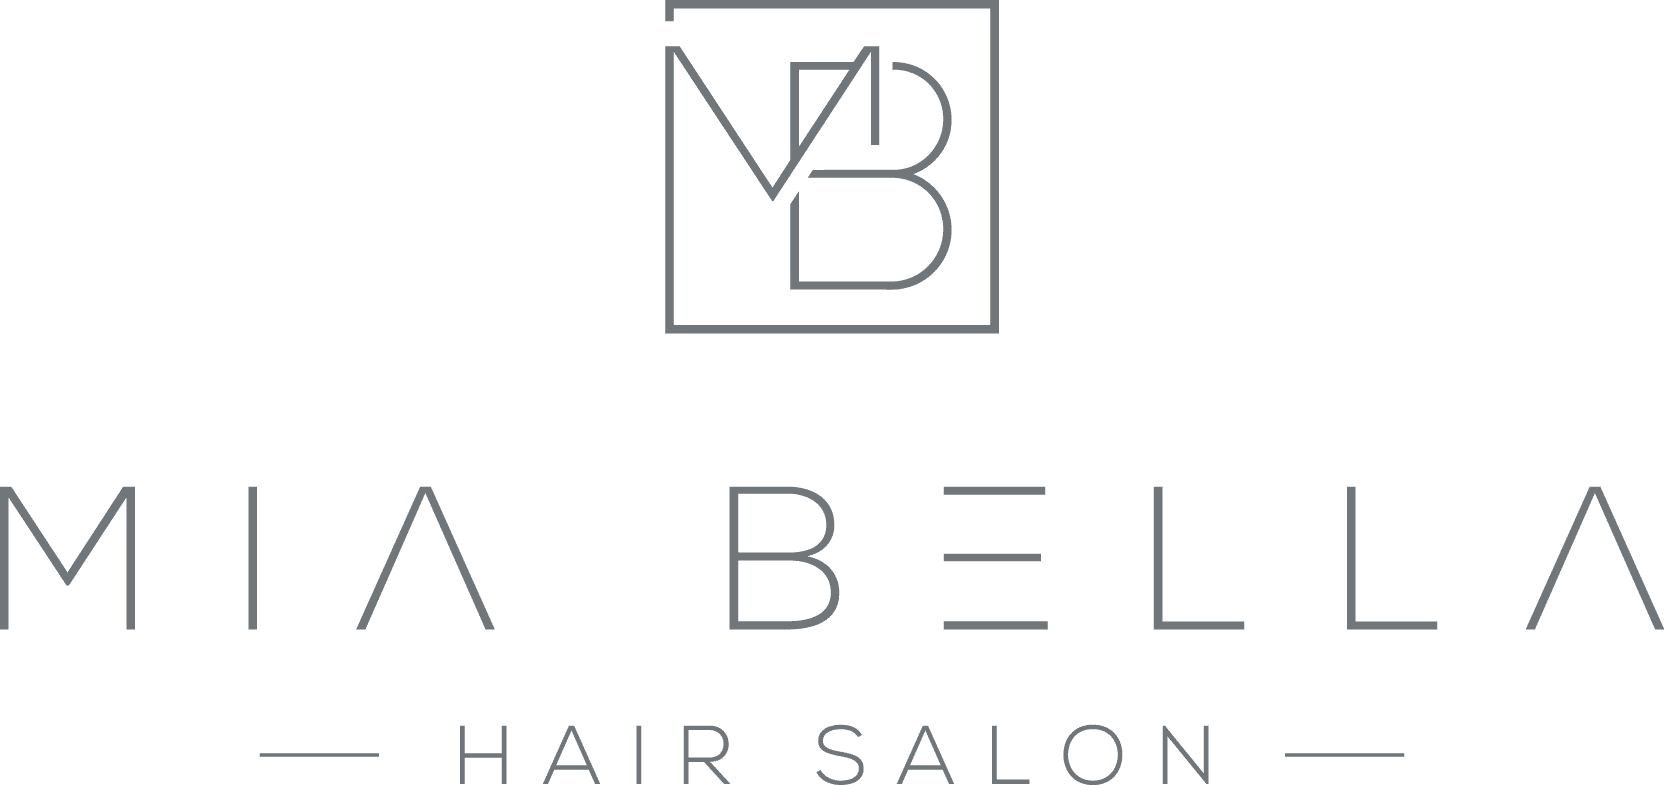 A Hair Salon Is An Institution That Provides A Host Of Hair-related Services For Customers